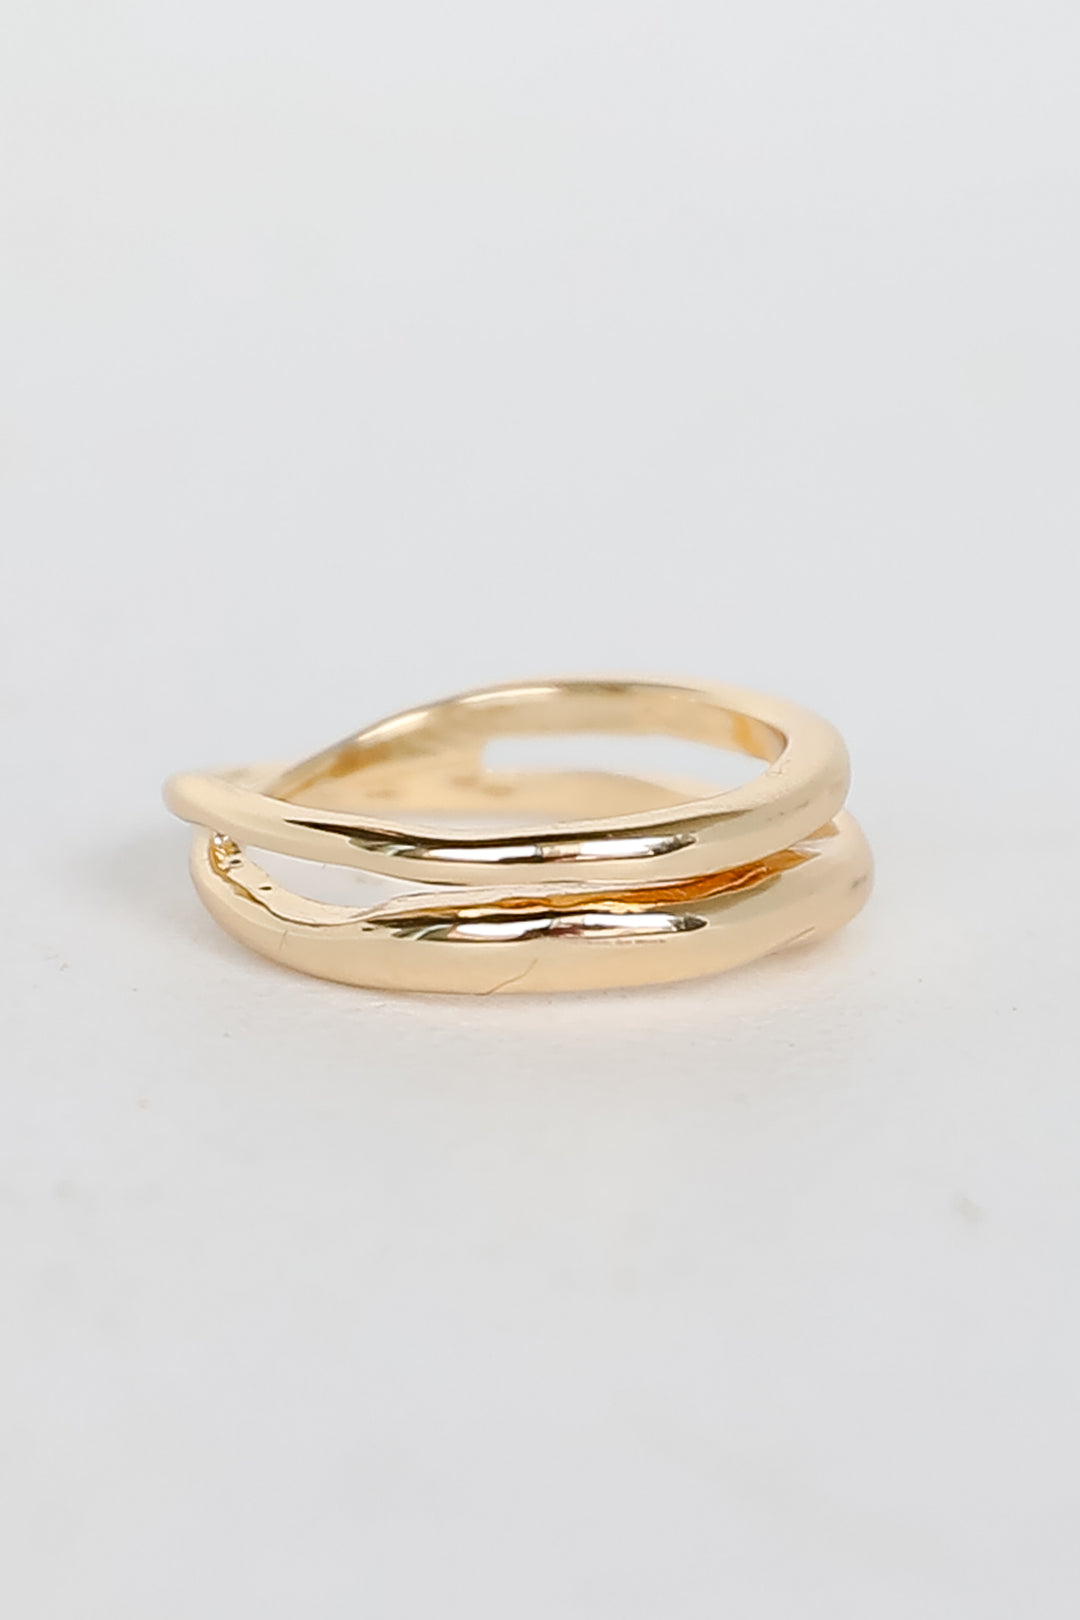 Scarlett Gold Double Ring summer jewelry